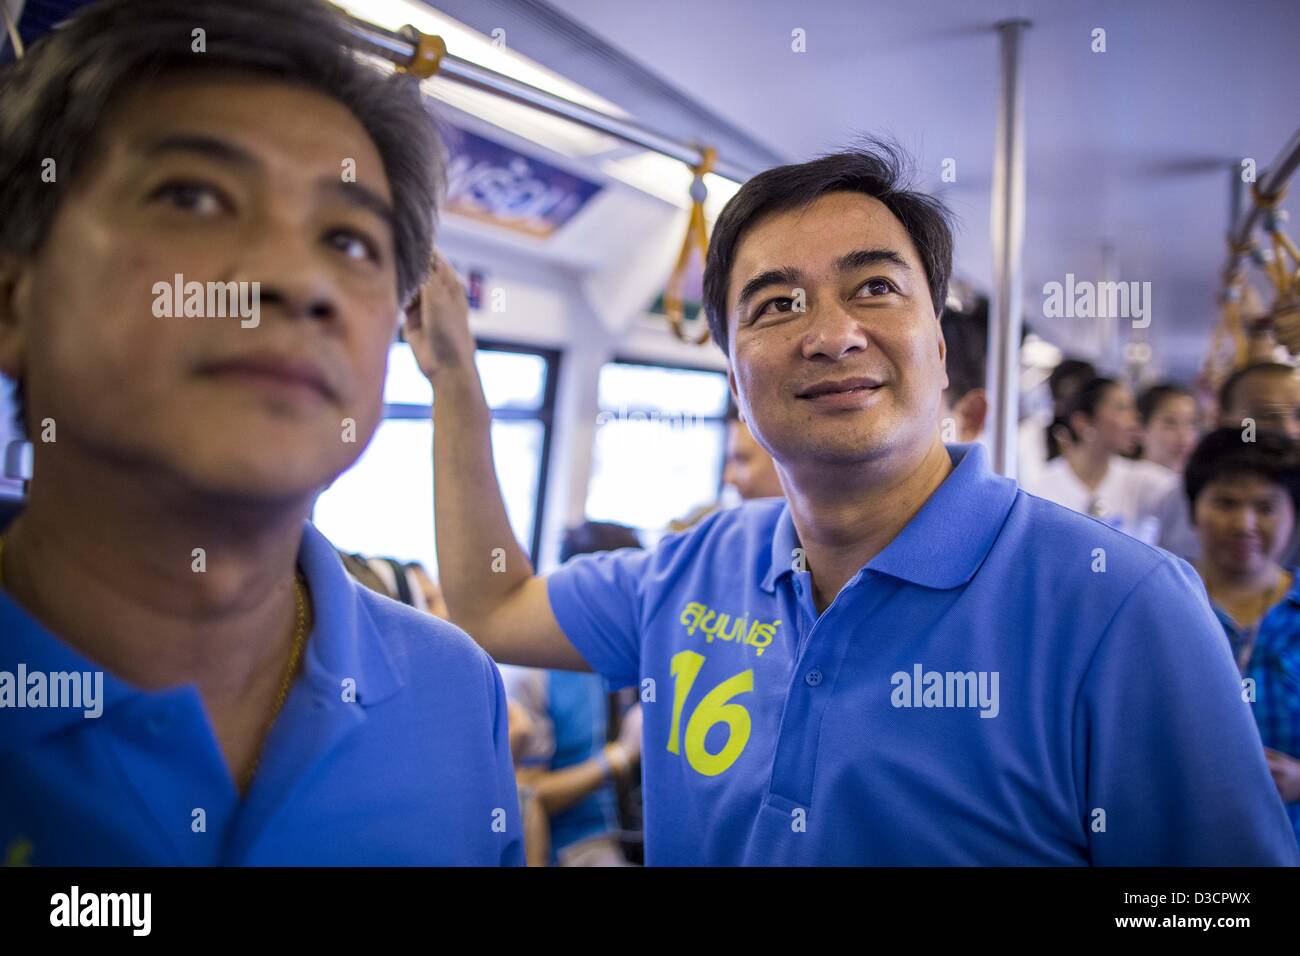 Feb. 16, 2013 - Bangkok, Thailand - ABHISIT VEJJAJIVA, former Prime Minister of Thailand, rides the BTS Skytrain while he campaigns for his party colleague Sukhumbhand Paribatra ahead of Bangkok's governor election. Bangkok residents go to the polls on March 3 to elect a new governor. Sukhumbhand Paribatra, the current governor, is running on the Democrat's ticket and is getting help from national politicians like Abhisit Vejjajiva, the former Thai Prime Minister. One of Sukhumbhand's campaign pledges is to improve Bangkok's mass transit and transportation system. Abhisist road the BTS Skytrai Stock Photo